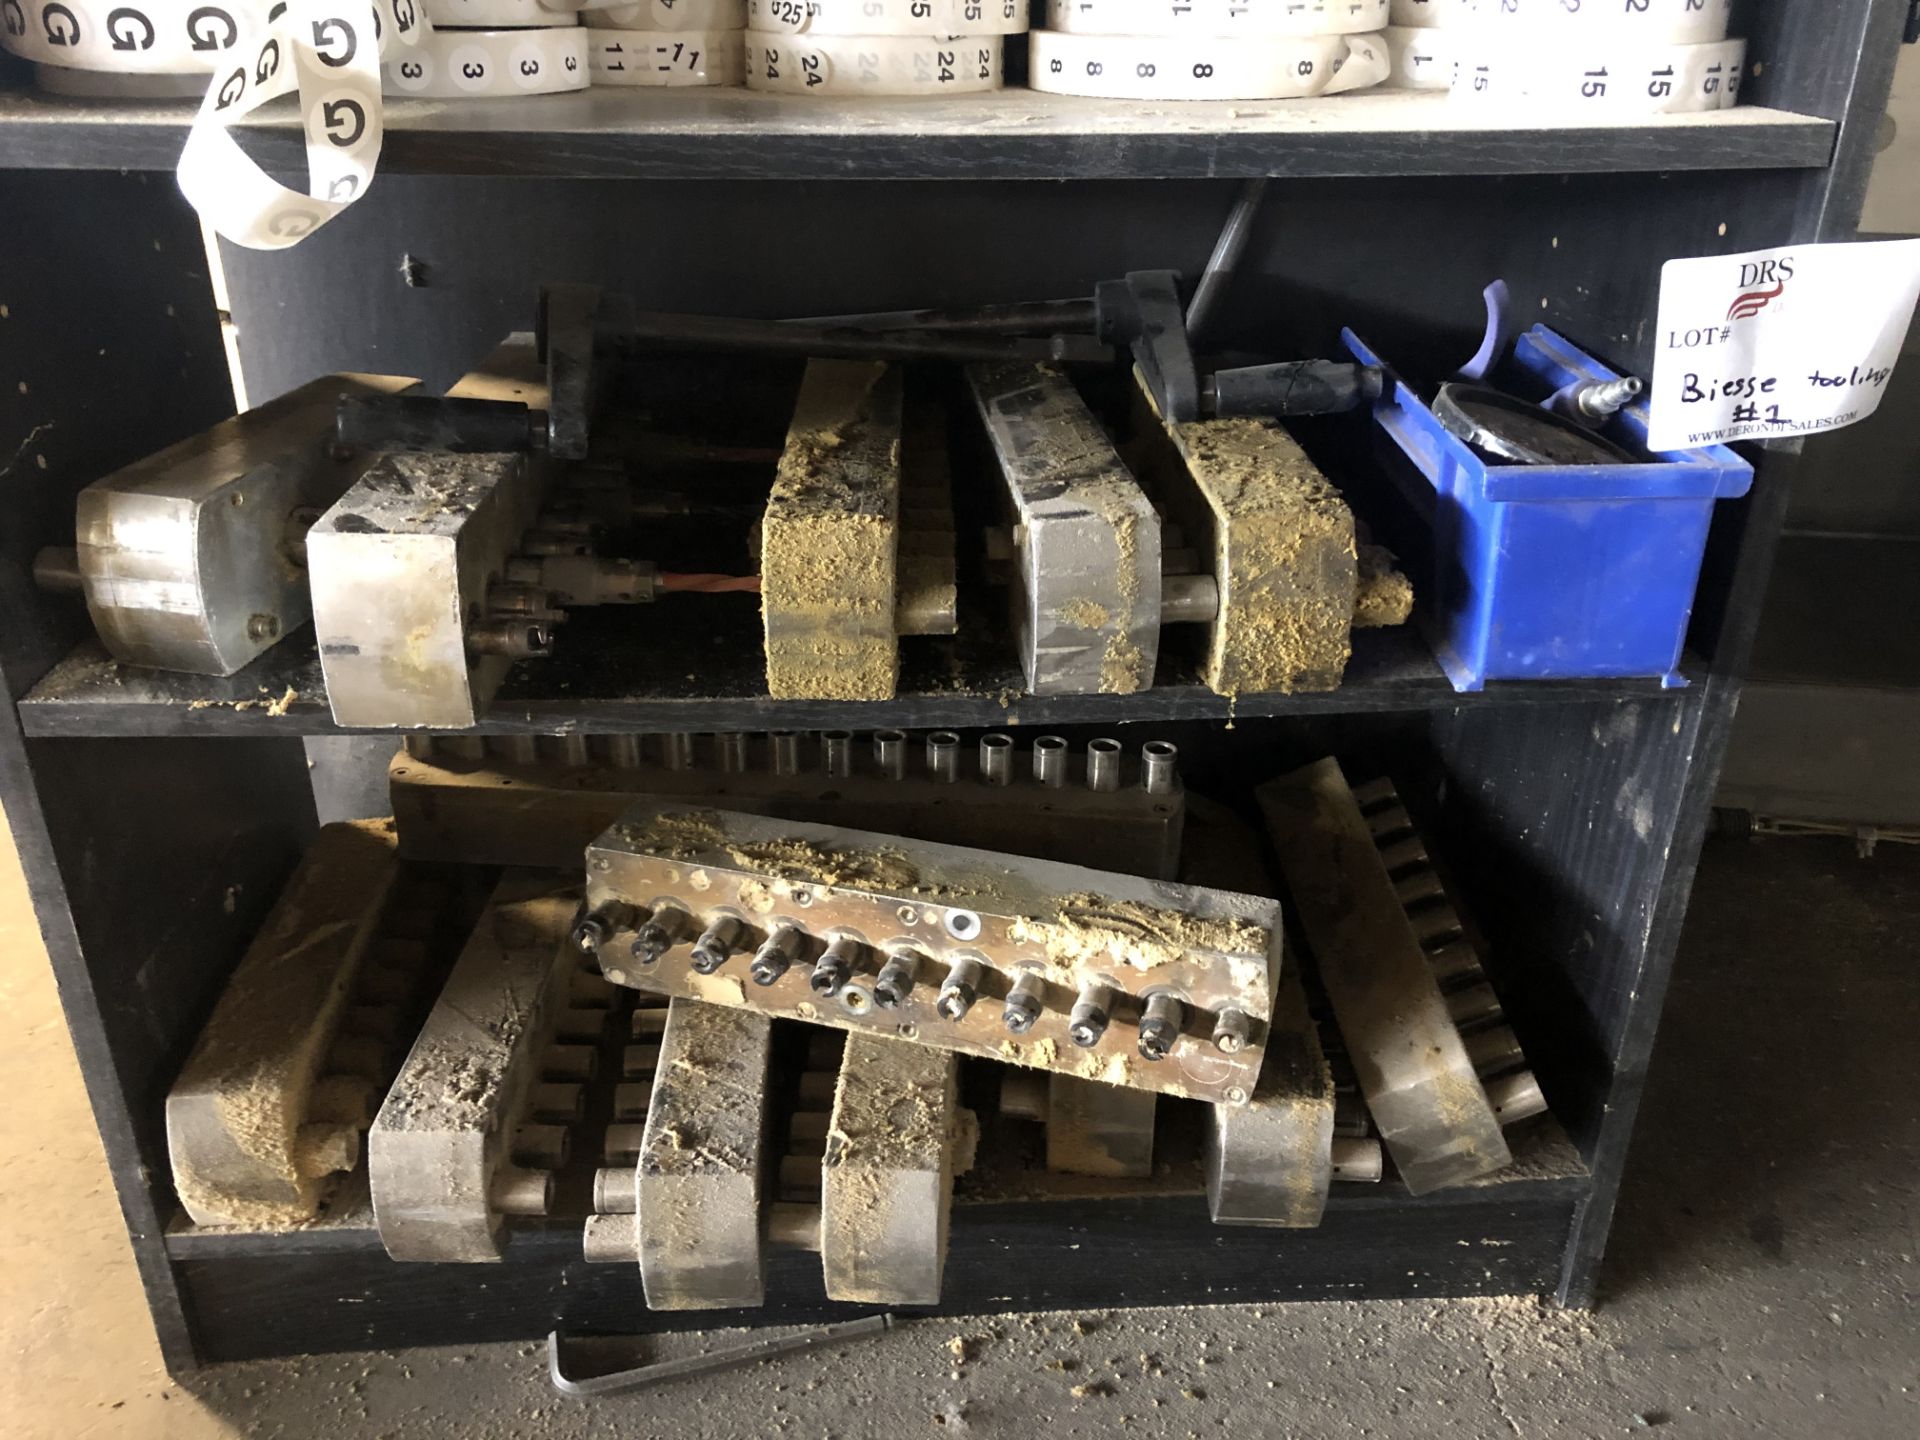 LOT OF SPARE DRILL BANKS FOR BIESSE DRILLS - Image 2 of 2